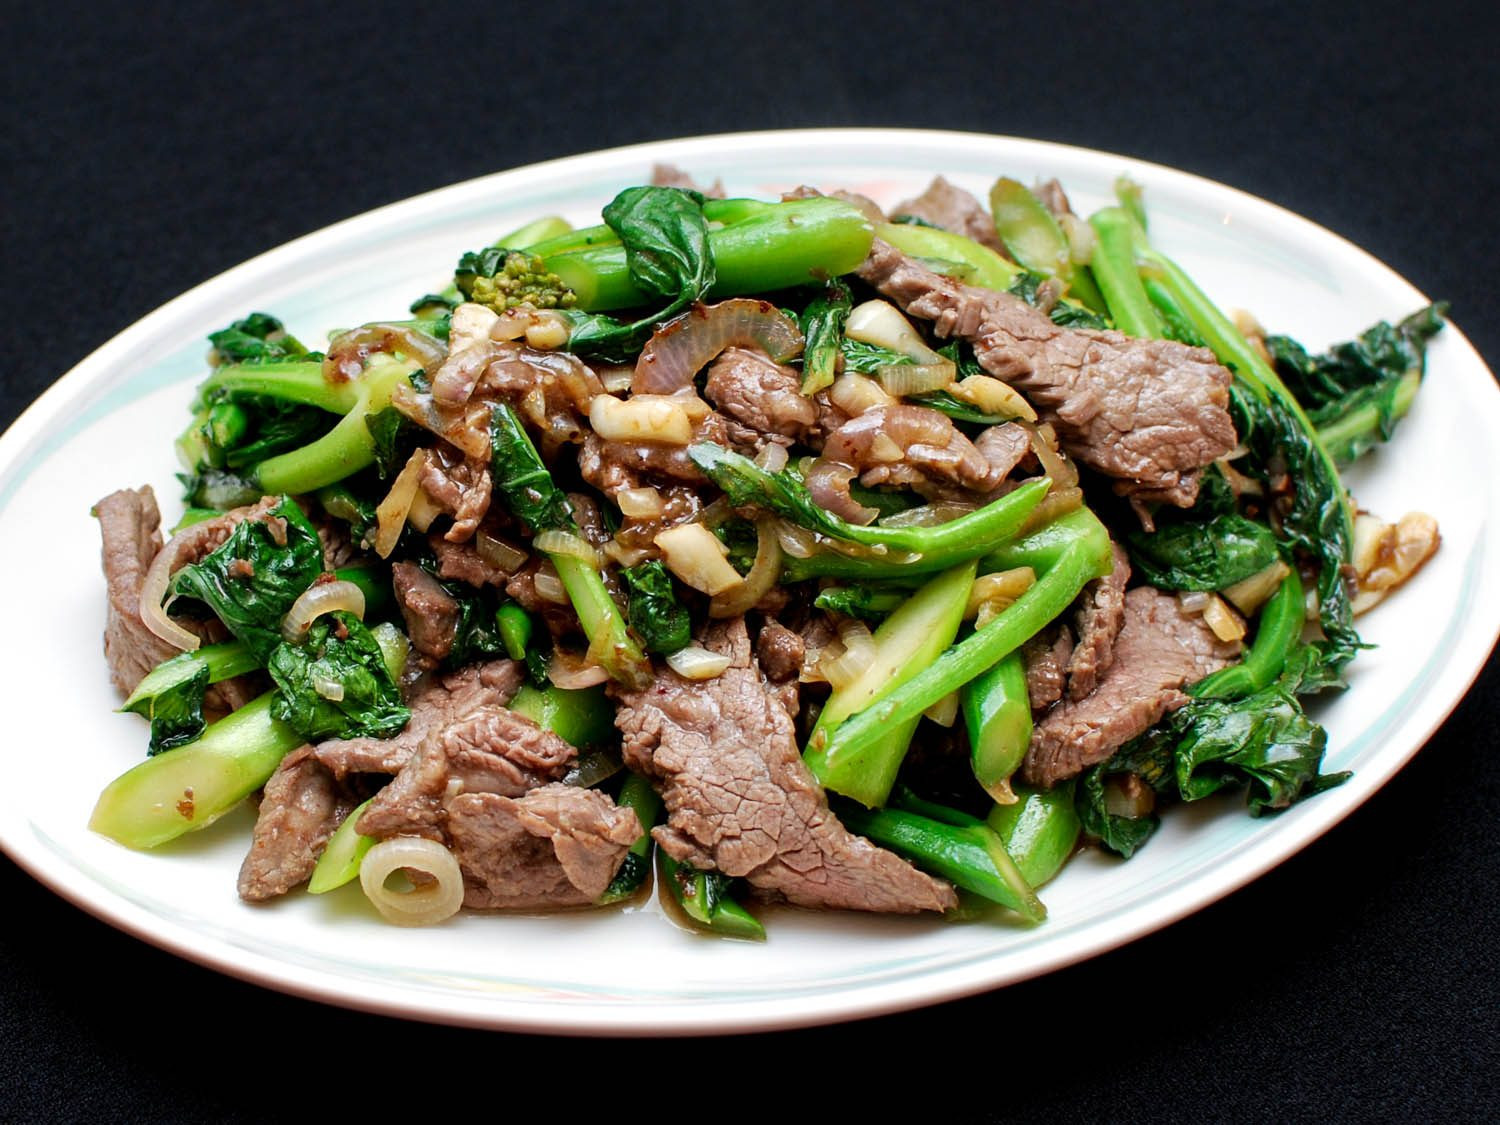 Asian Stir Fry Recipes
 Stir Fried Beef With Chinese Broccoli Recipe